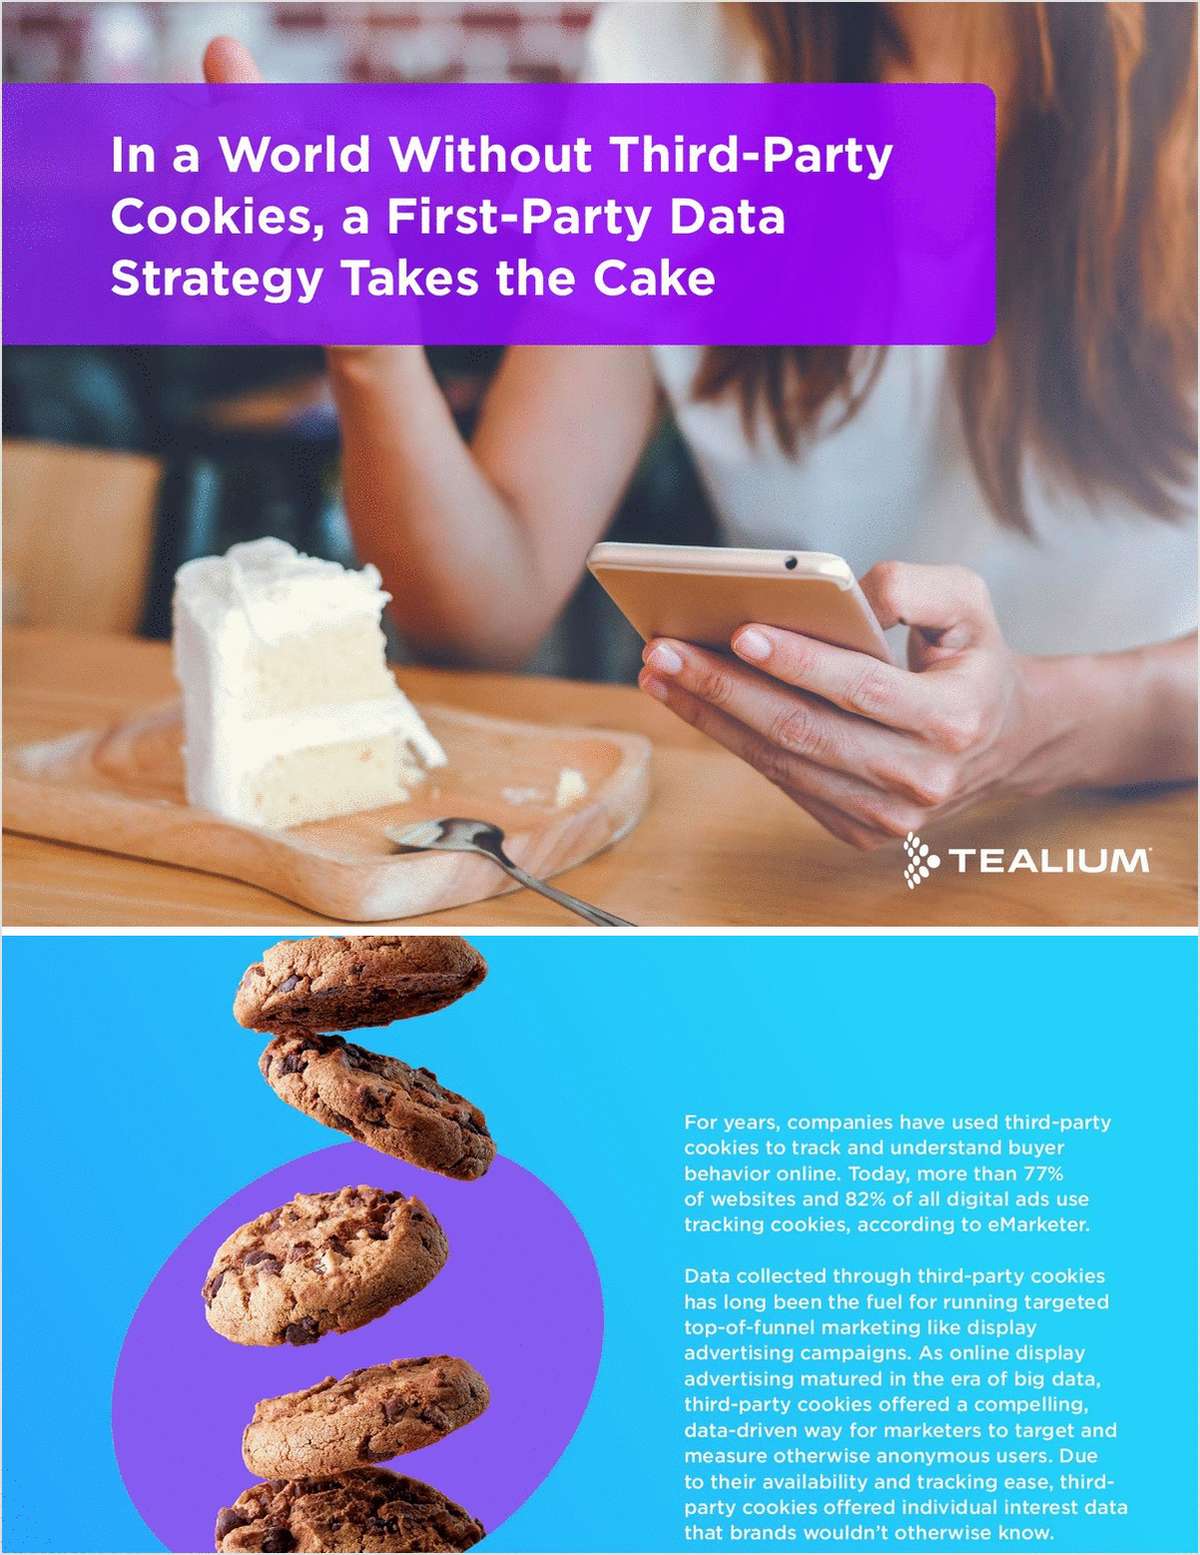 Quick Read: A First-Party Data Strategy Takes the Cake